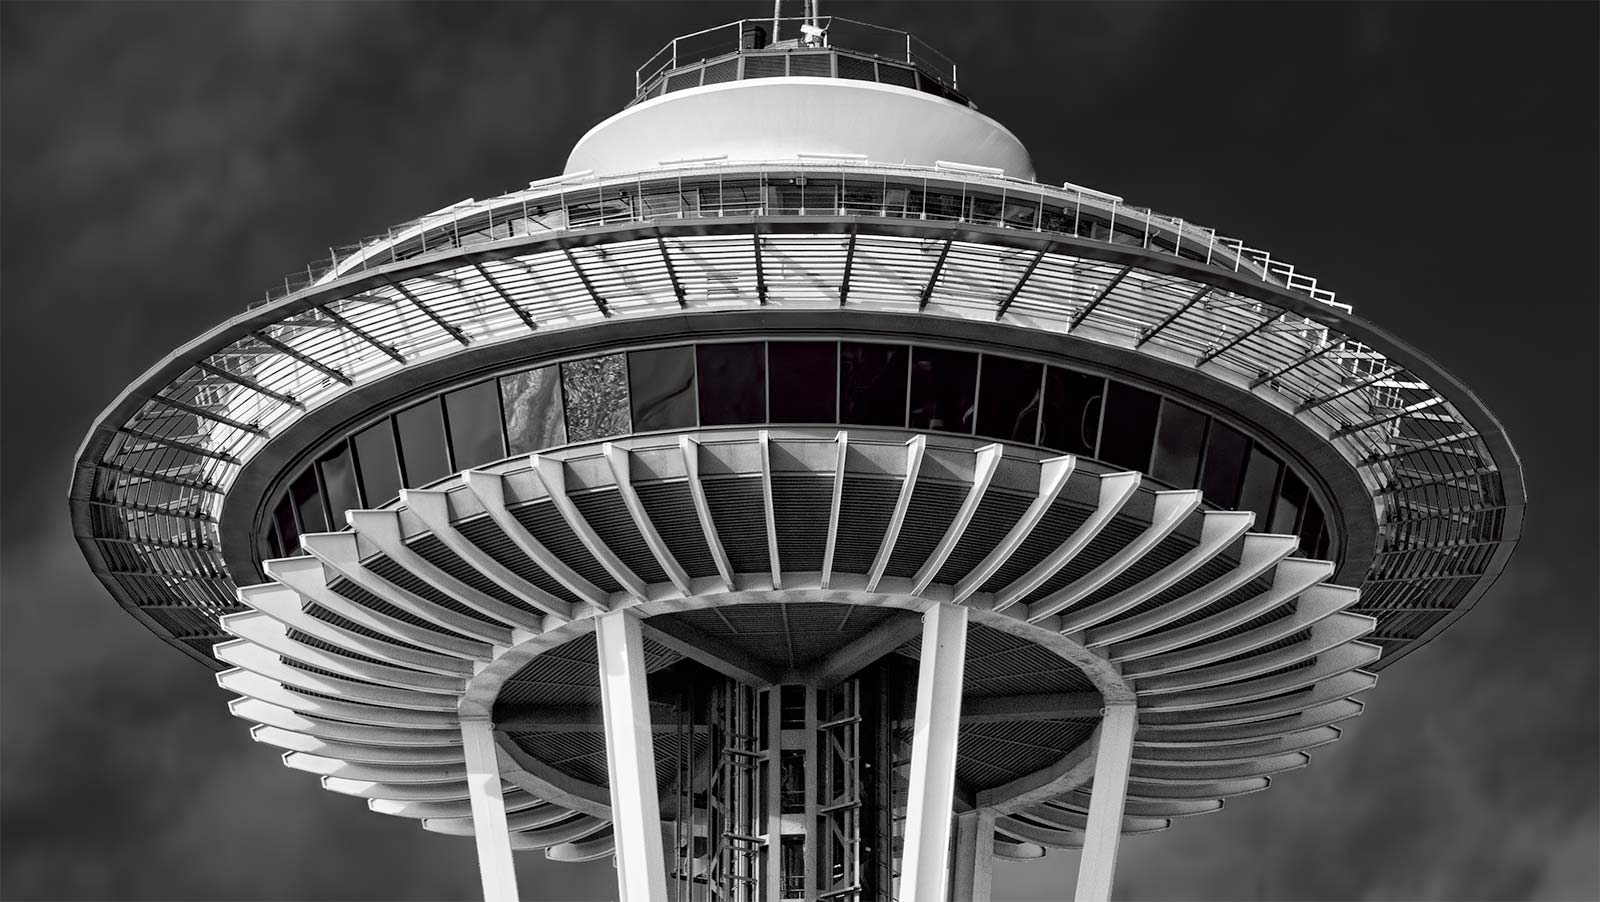 The first image I shot in Seattle Seattle Space Needle 1600x902